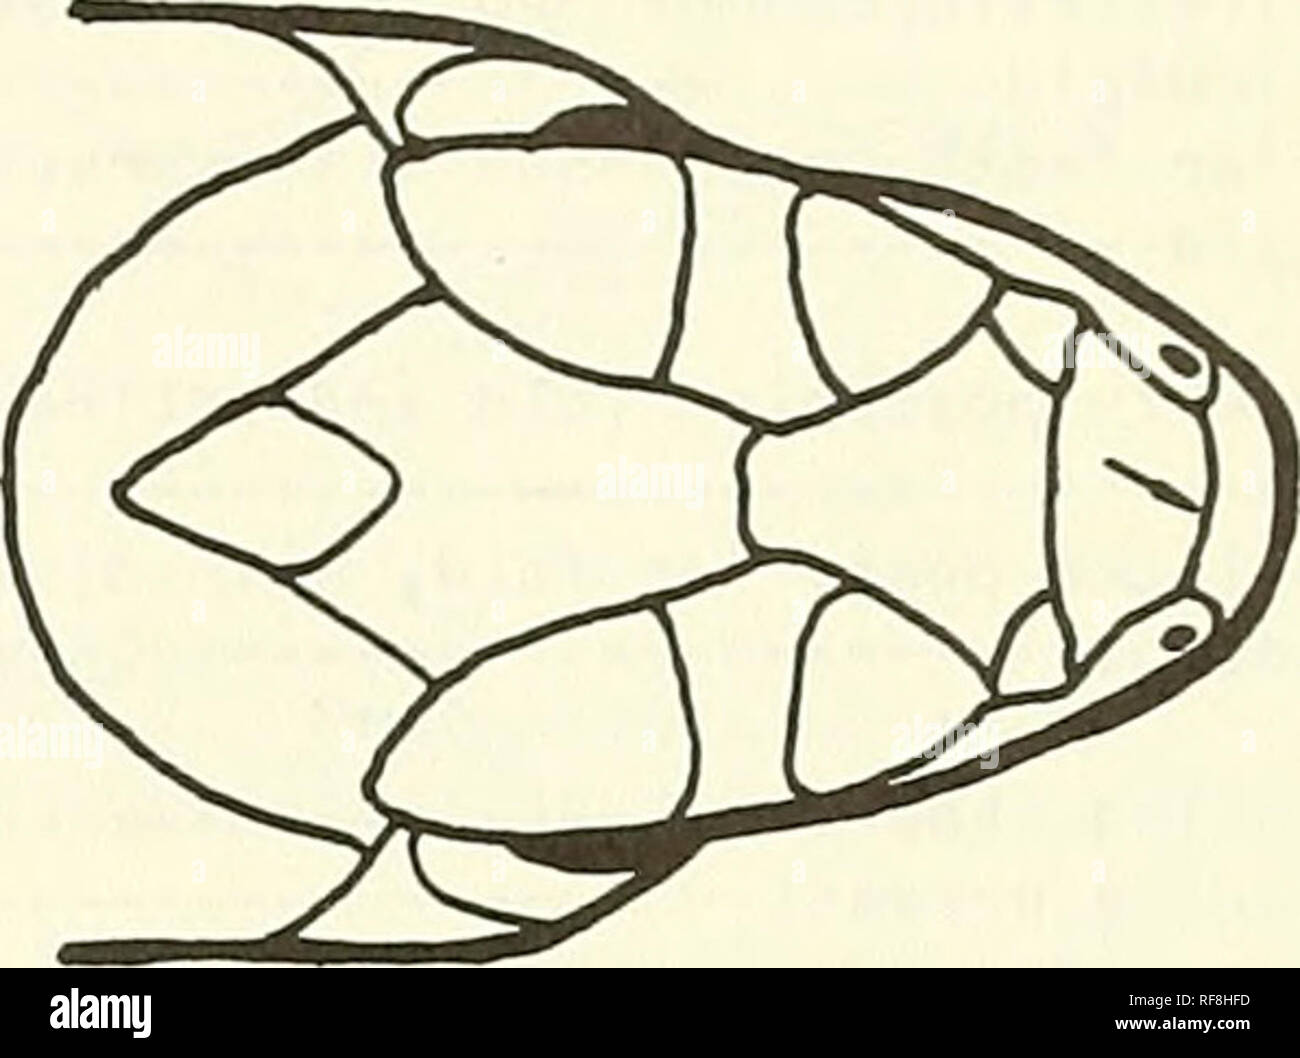 . Catalogue of the neotropical Squamata. Squamata; Reptiles. Fig. 2. Eumeces. with one pair of scales between rostral and first unpaired plate. 20.Temporal area between eye and ear opening covered with enlarged, well-differentiated scales Eumeces Temporal area covered with scales similar in appearance to body scales Mabuya 21.Eyelid fixed, transparent, covering eye Ablepharus Eyelid movable, not fixed in place over eye Le iolop isma 22,Anterior nasal scales in contact between ros- tral and frontonasal 23 Anterior nasal scales separated by rostral and frontonasal 33 23. L imbs present, normal 2 Stock Photo